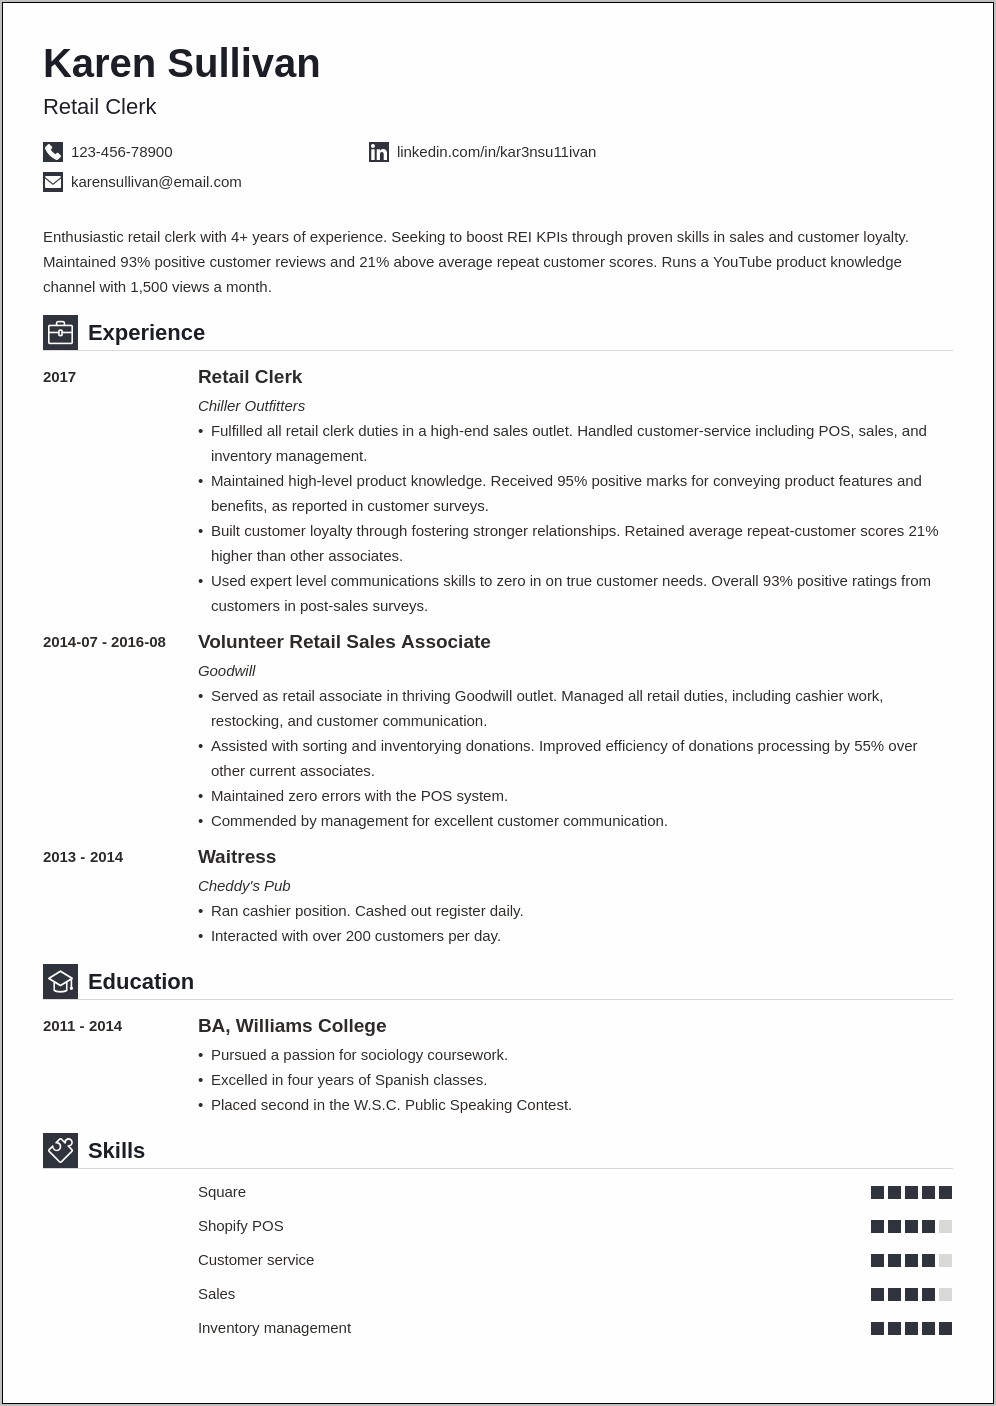 Resume Objective Statement For Retail Store